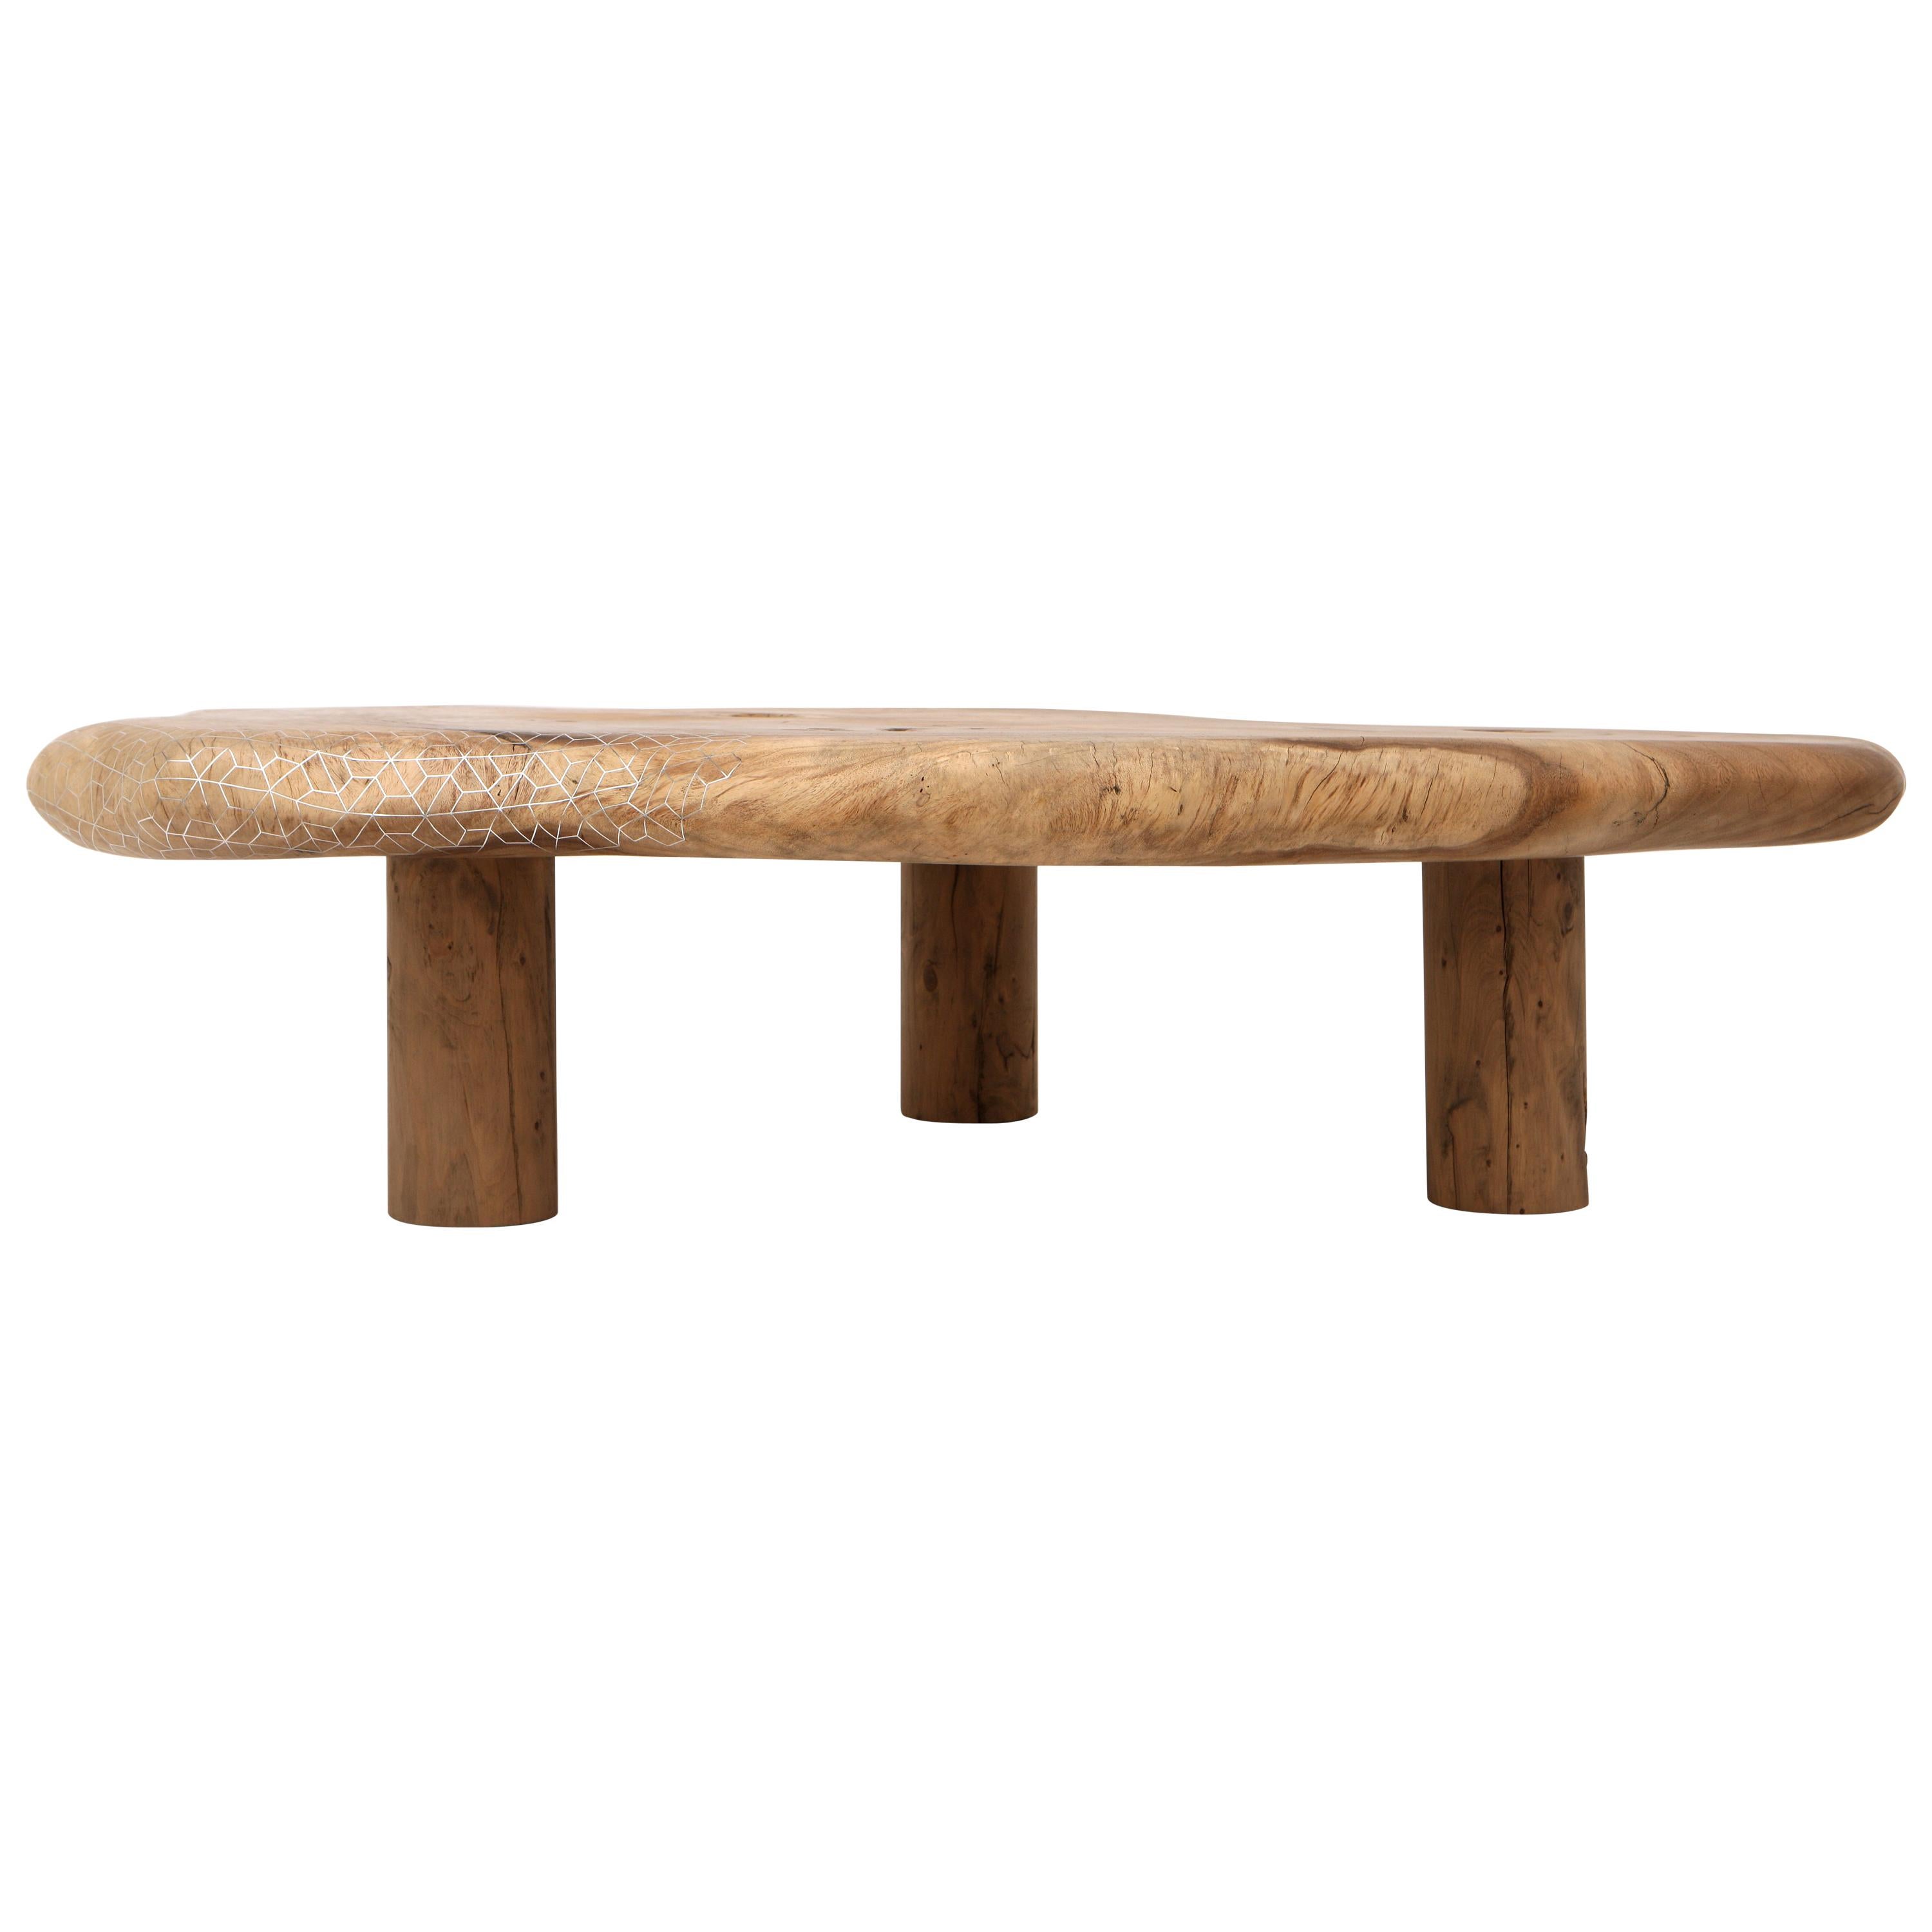 Natural Coordinates low table in Acacia wood - Unique piece For Sale